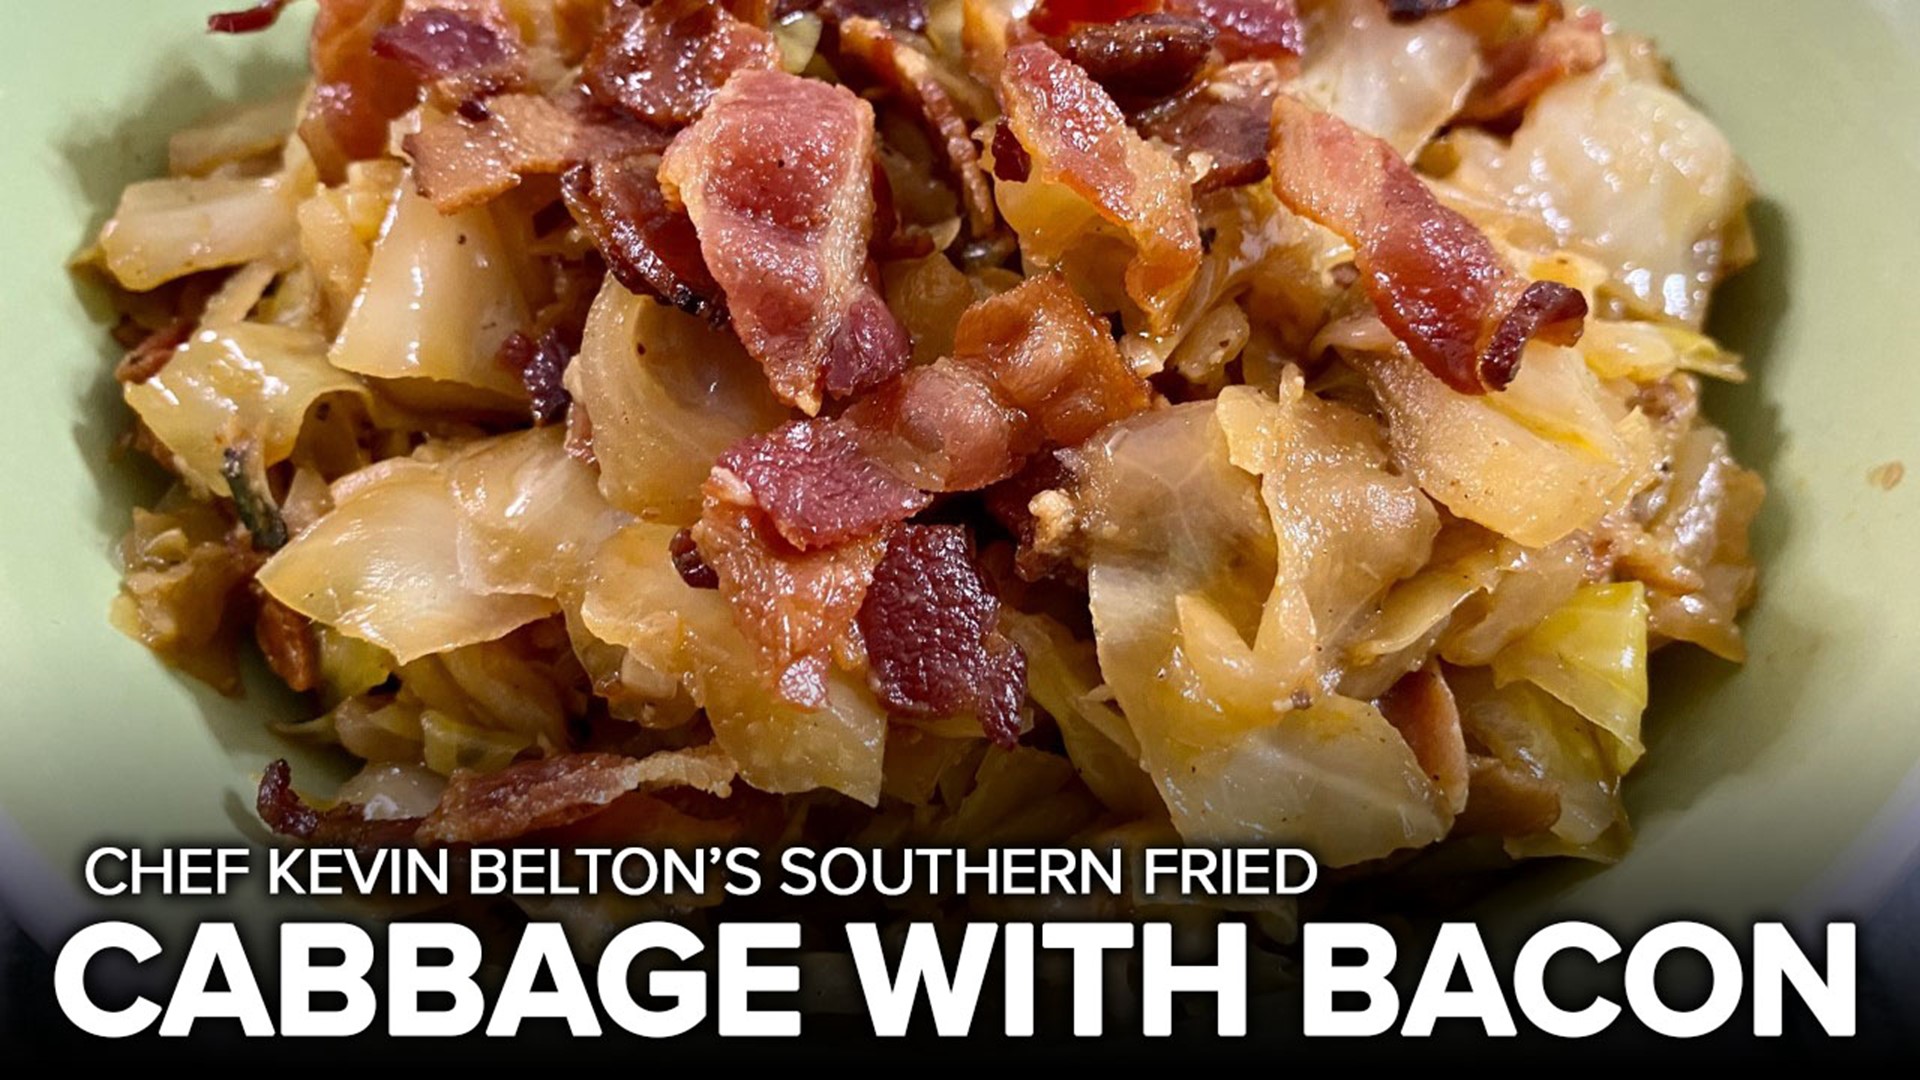 Looking for a cabbage recipe for New Year's Day? Start your new year right with cabbage and crispy bacon!